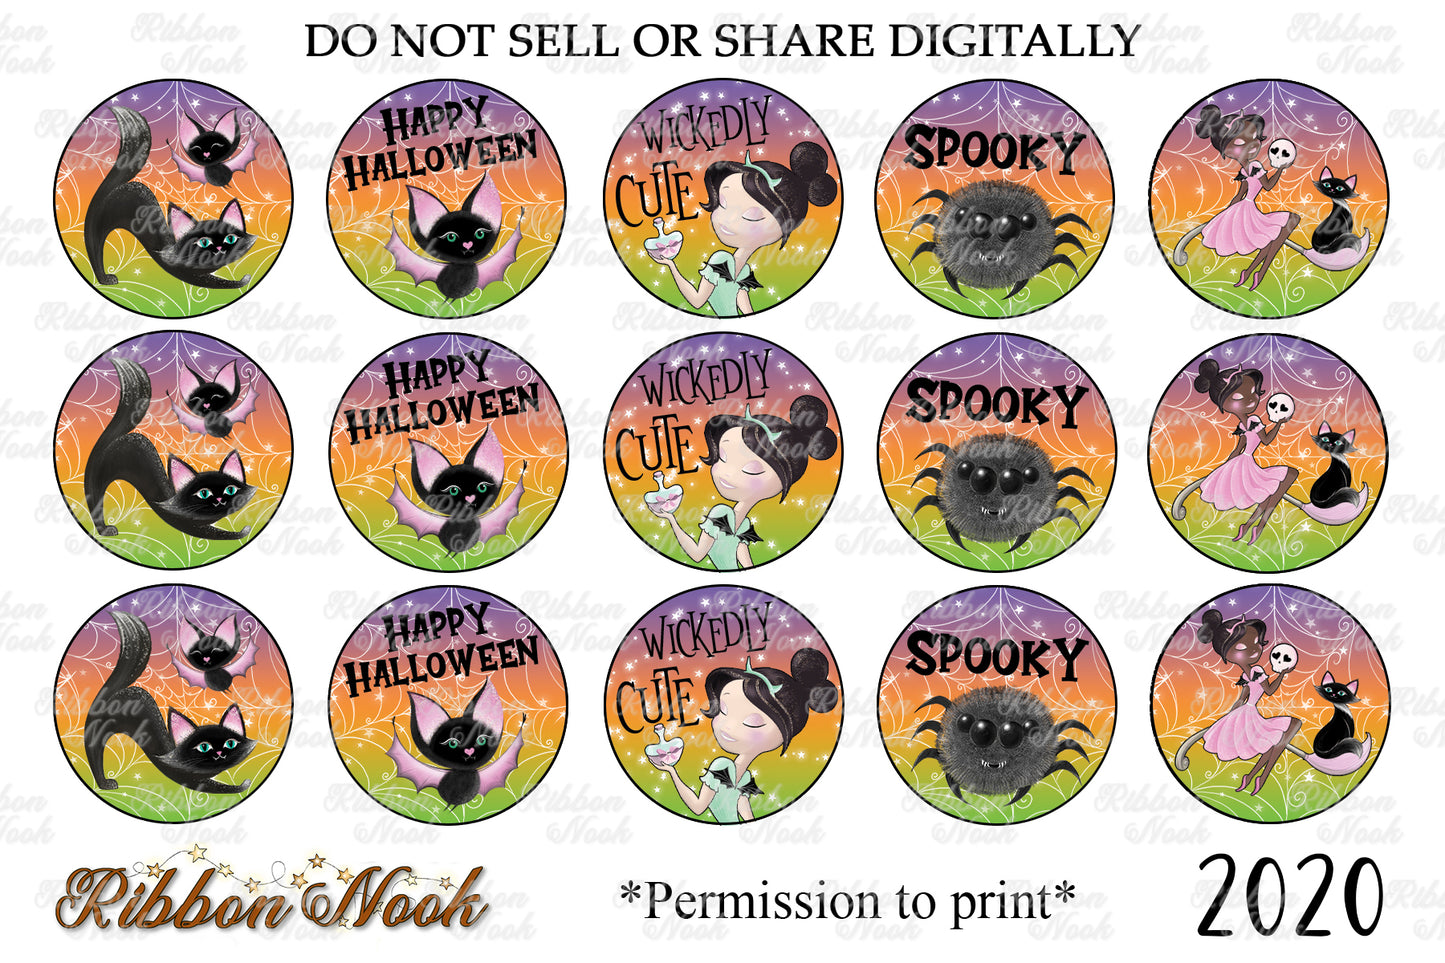 All Hallows Eve Halloween Bottle Cap Images